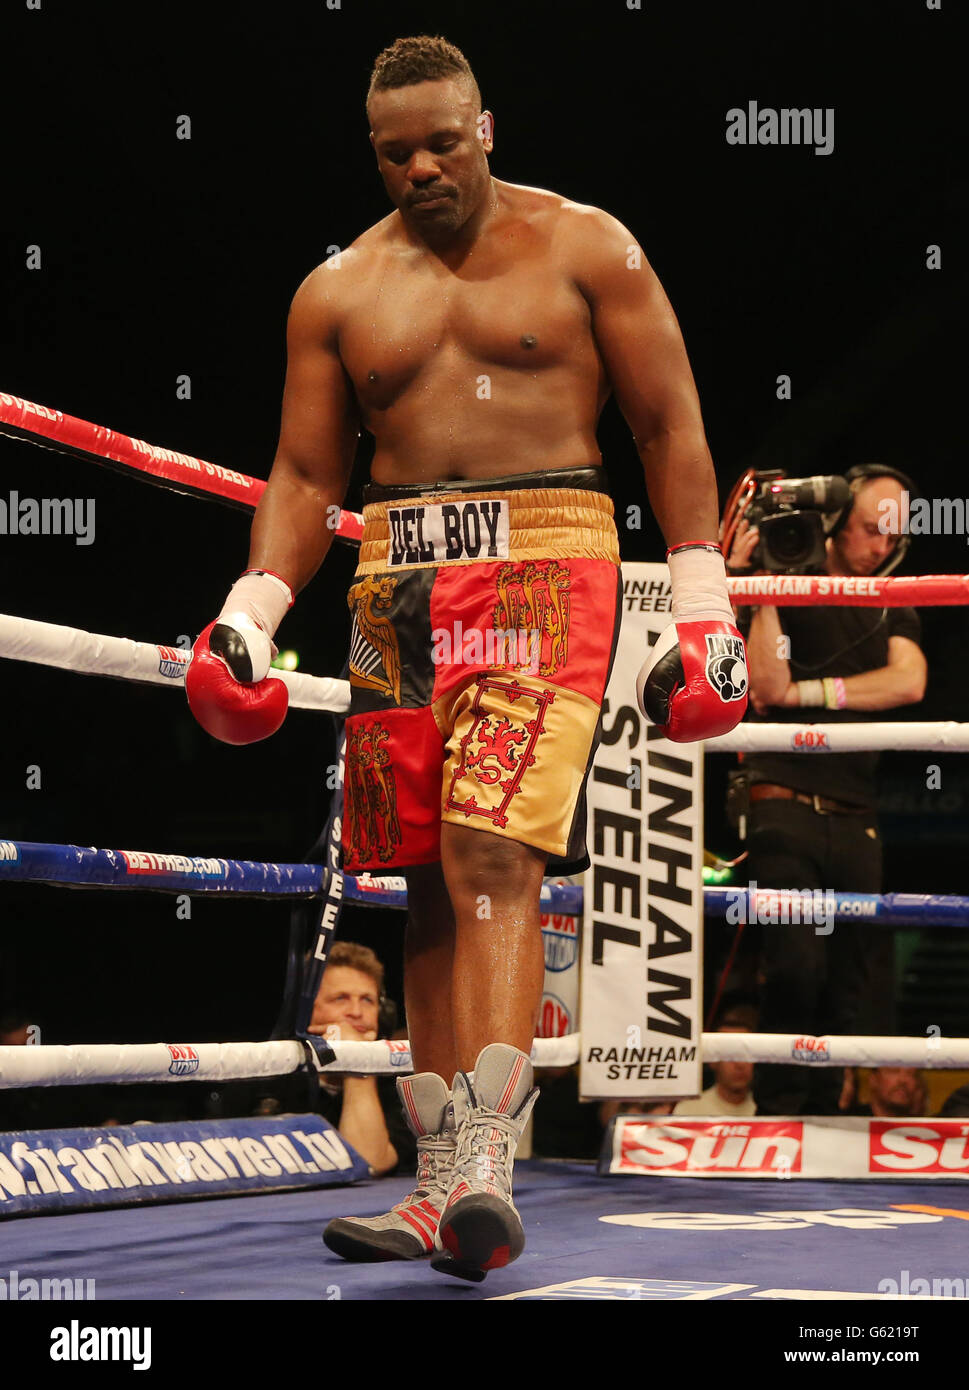 Dereck Chisora during the International Heavyweight Contest at Wembley Arena, London. Stock Photo